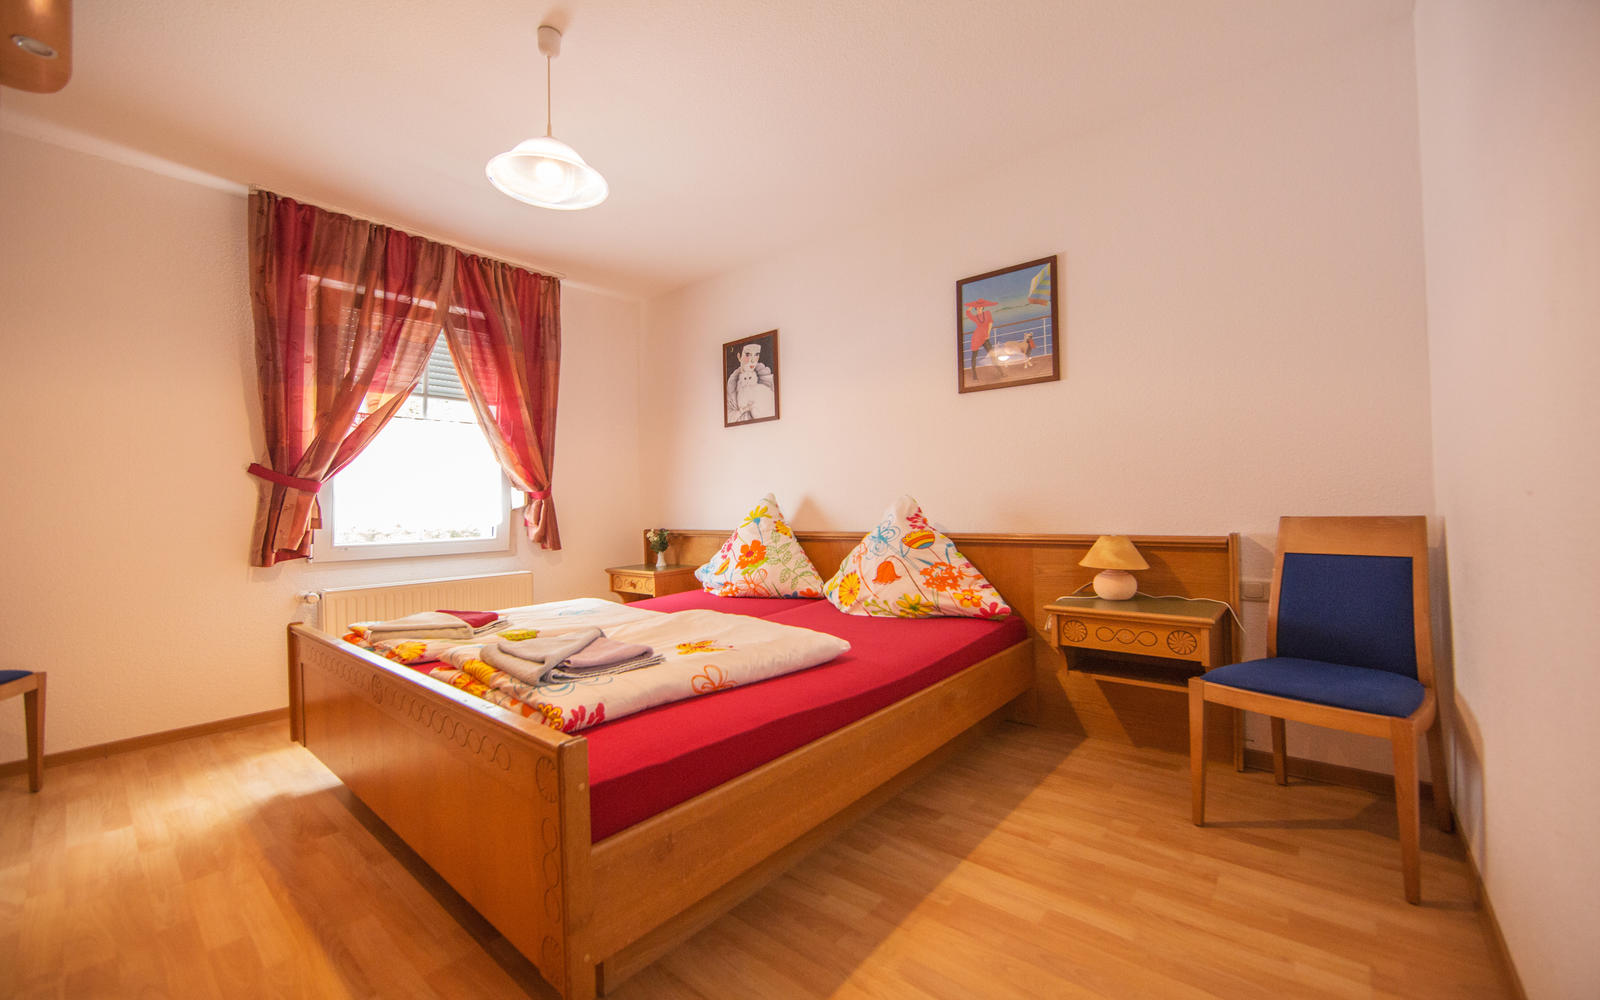 The beautiful Burghof guesthouse provide a comfortable stay in the district of Vicht von Stolberg. With us, you can relax and rest at a competitive price.